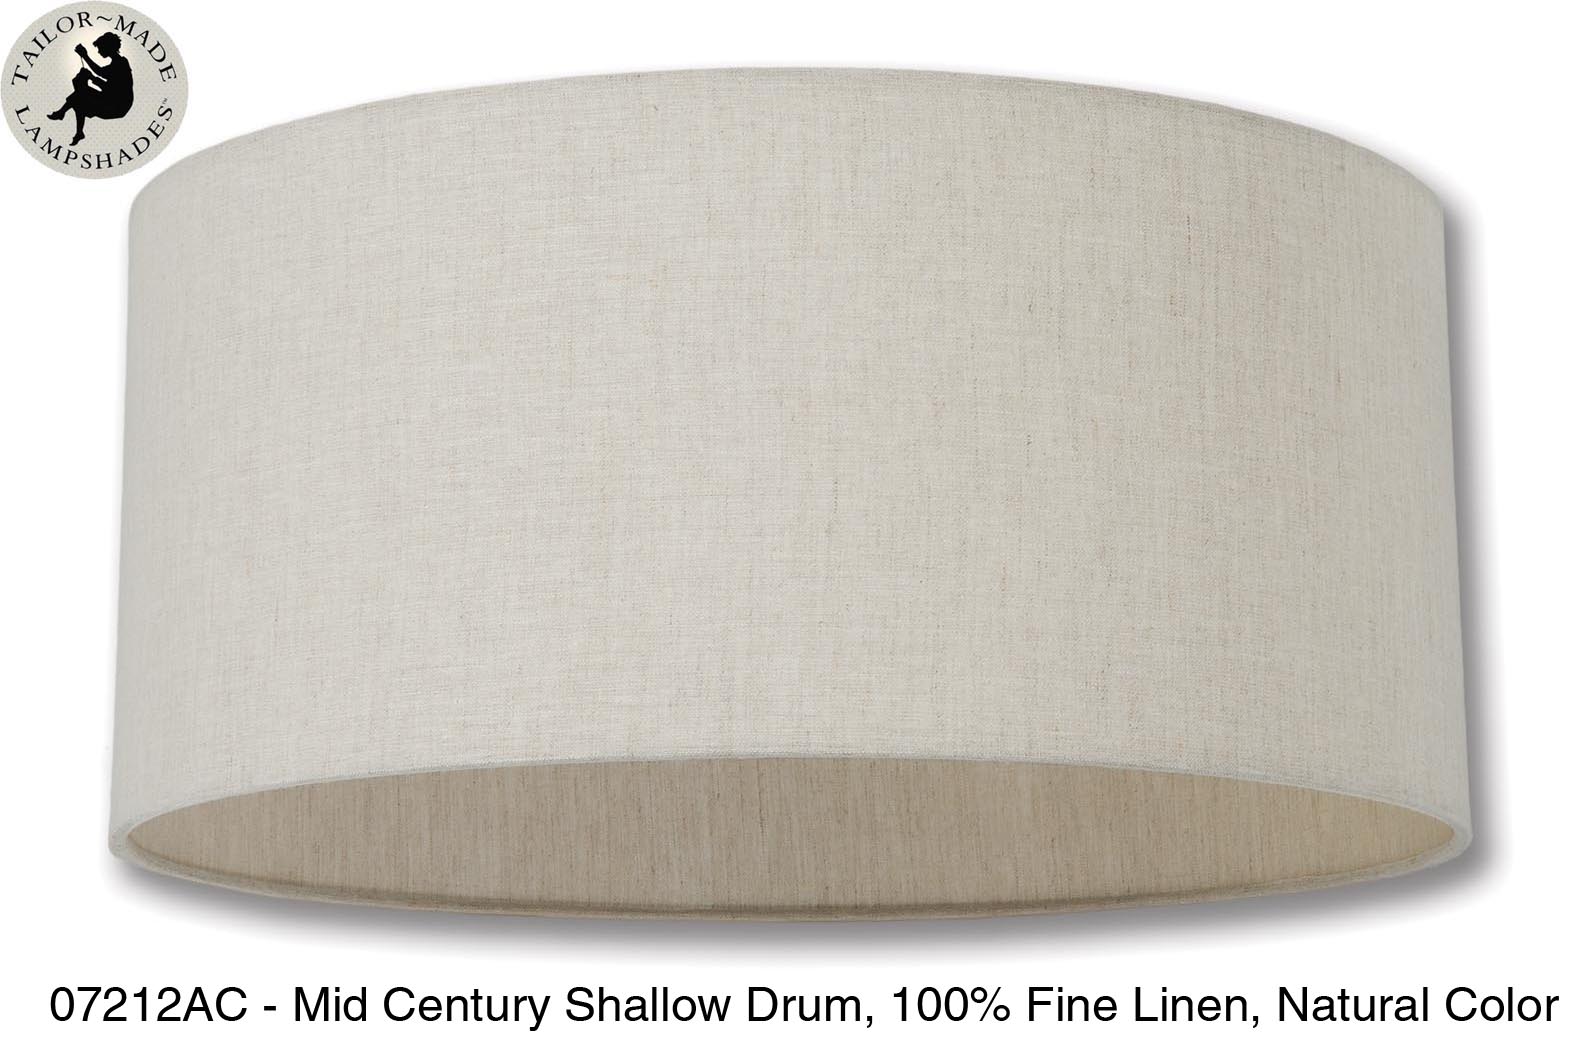 Mid Century Shallow Drum Lamp Shades - Off White Color, 100% Fine Linen